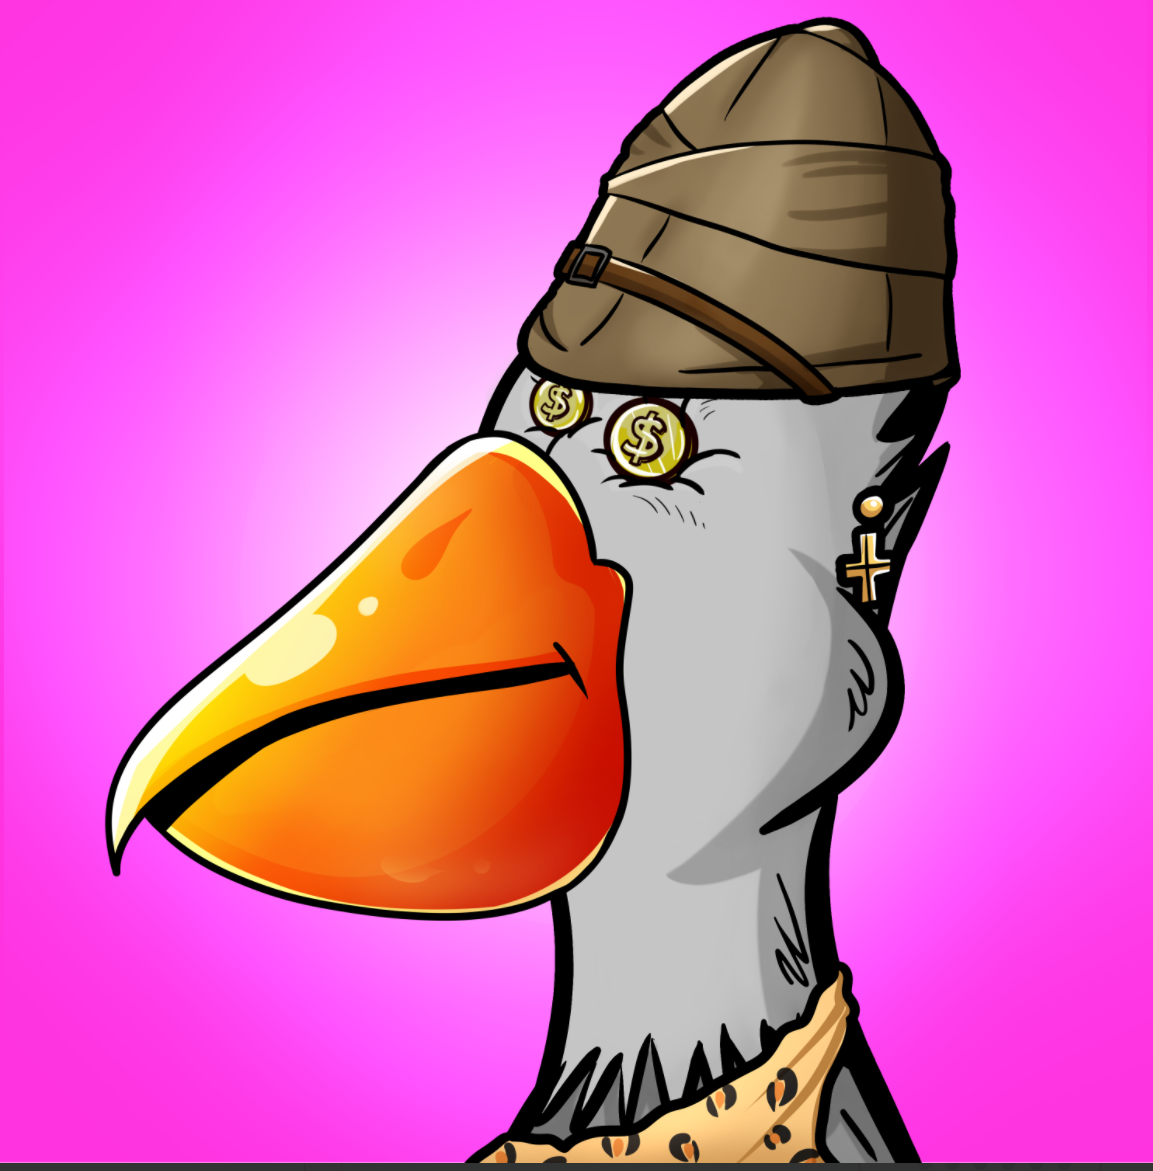 3D Overwater Pelican Collection: upload avatar into the Metaverse